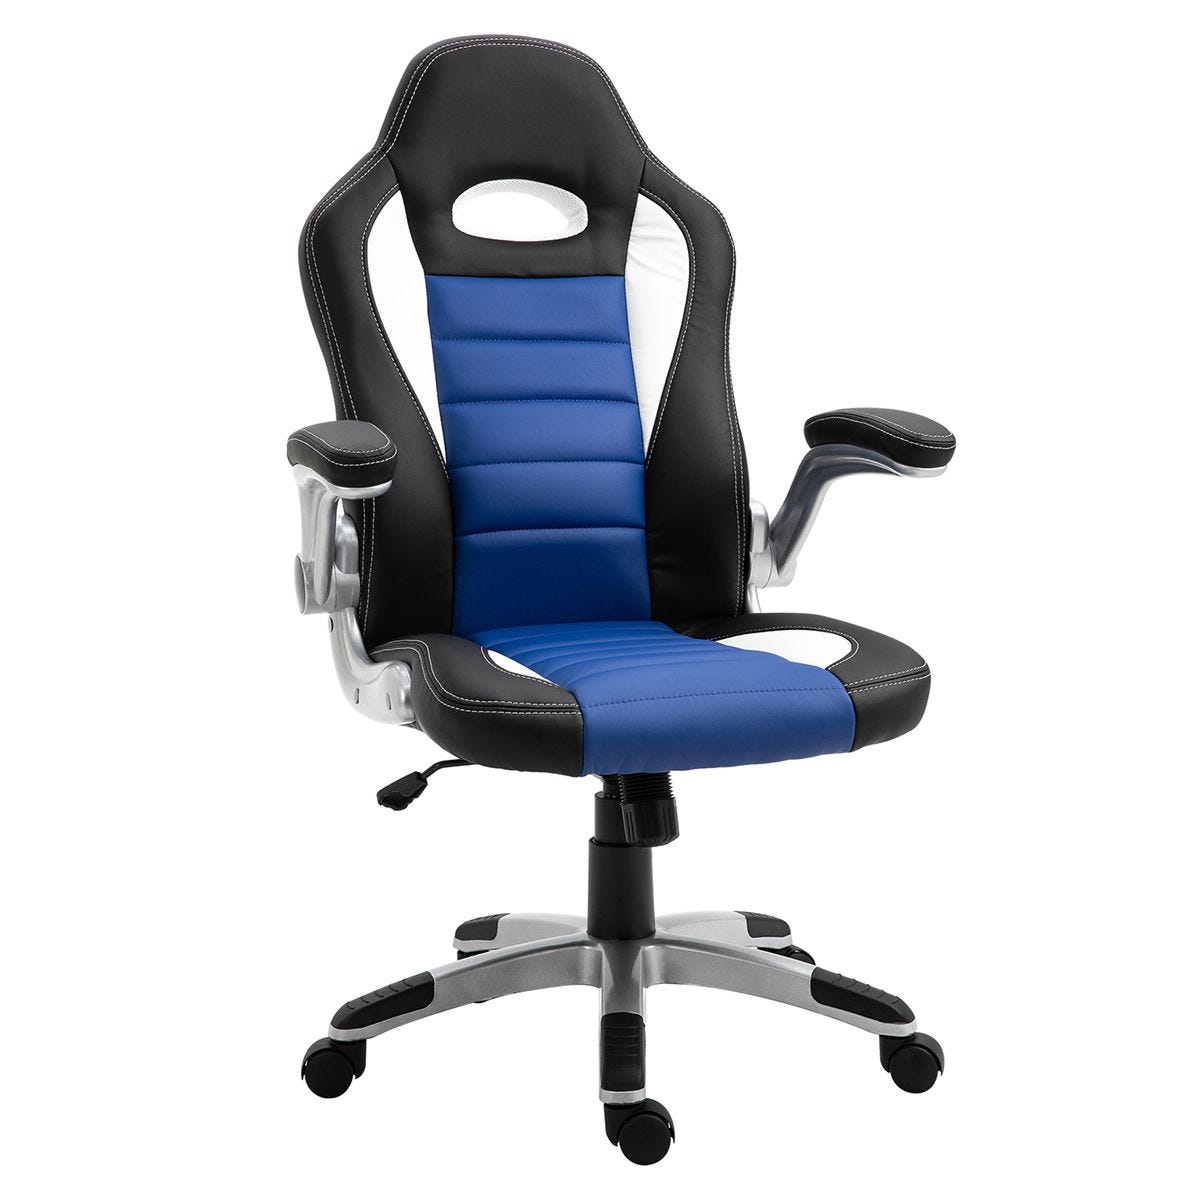 Equinox Get Set PU Leather Gaming Chair Black/Blue/White